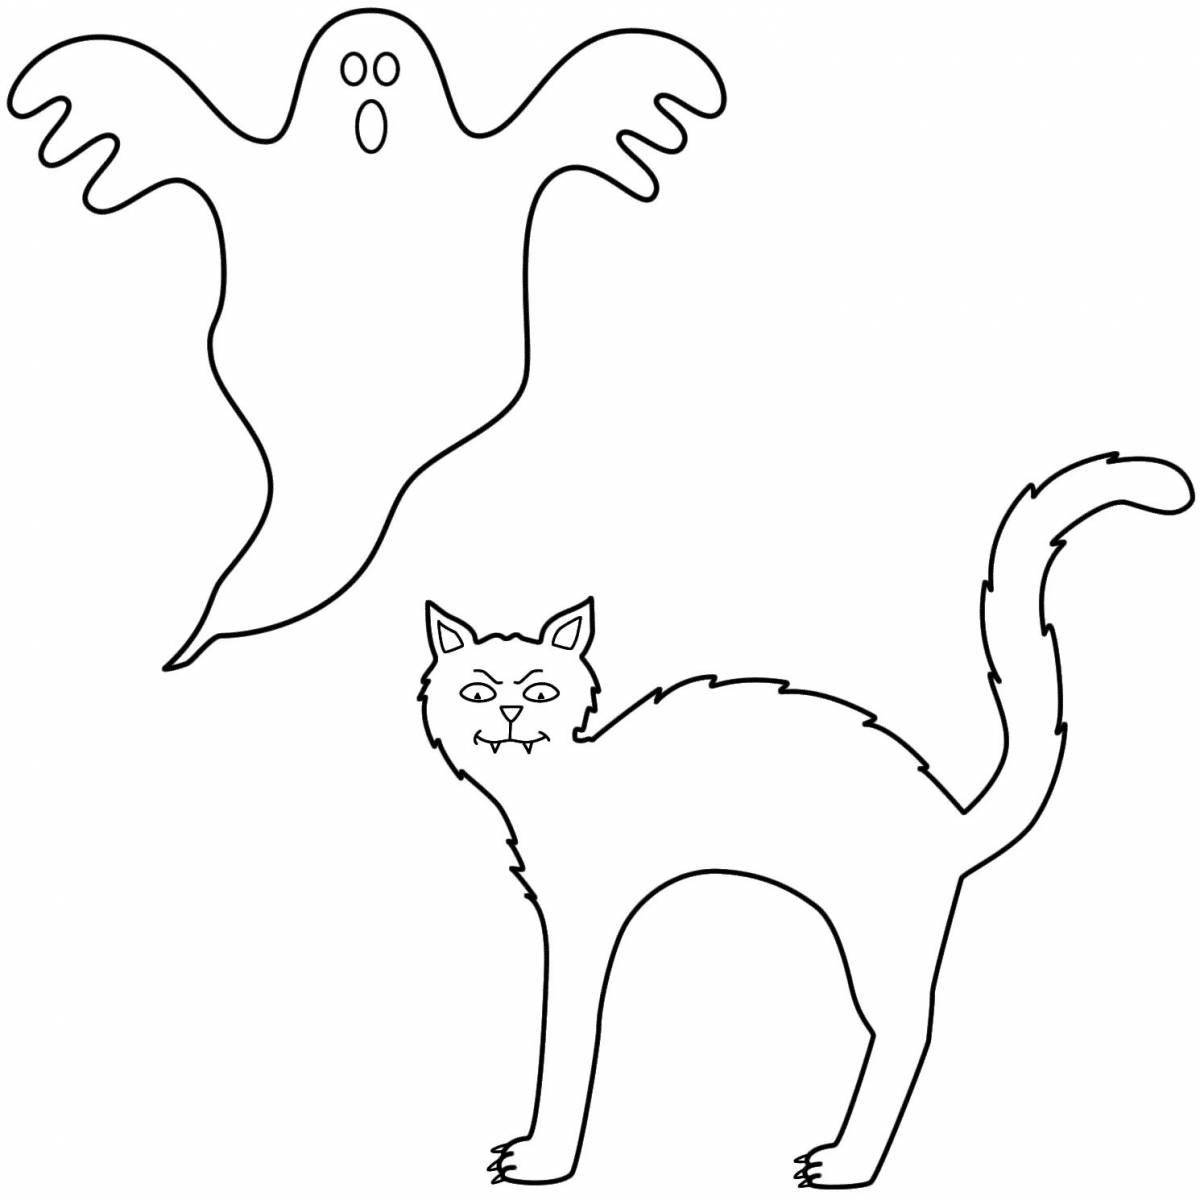 Coloring page adorable cat silhouette